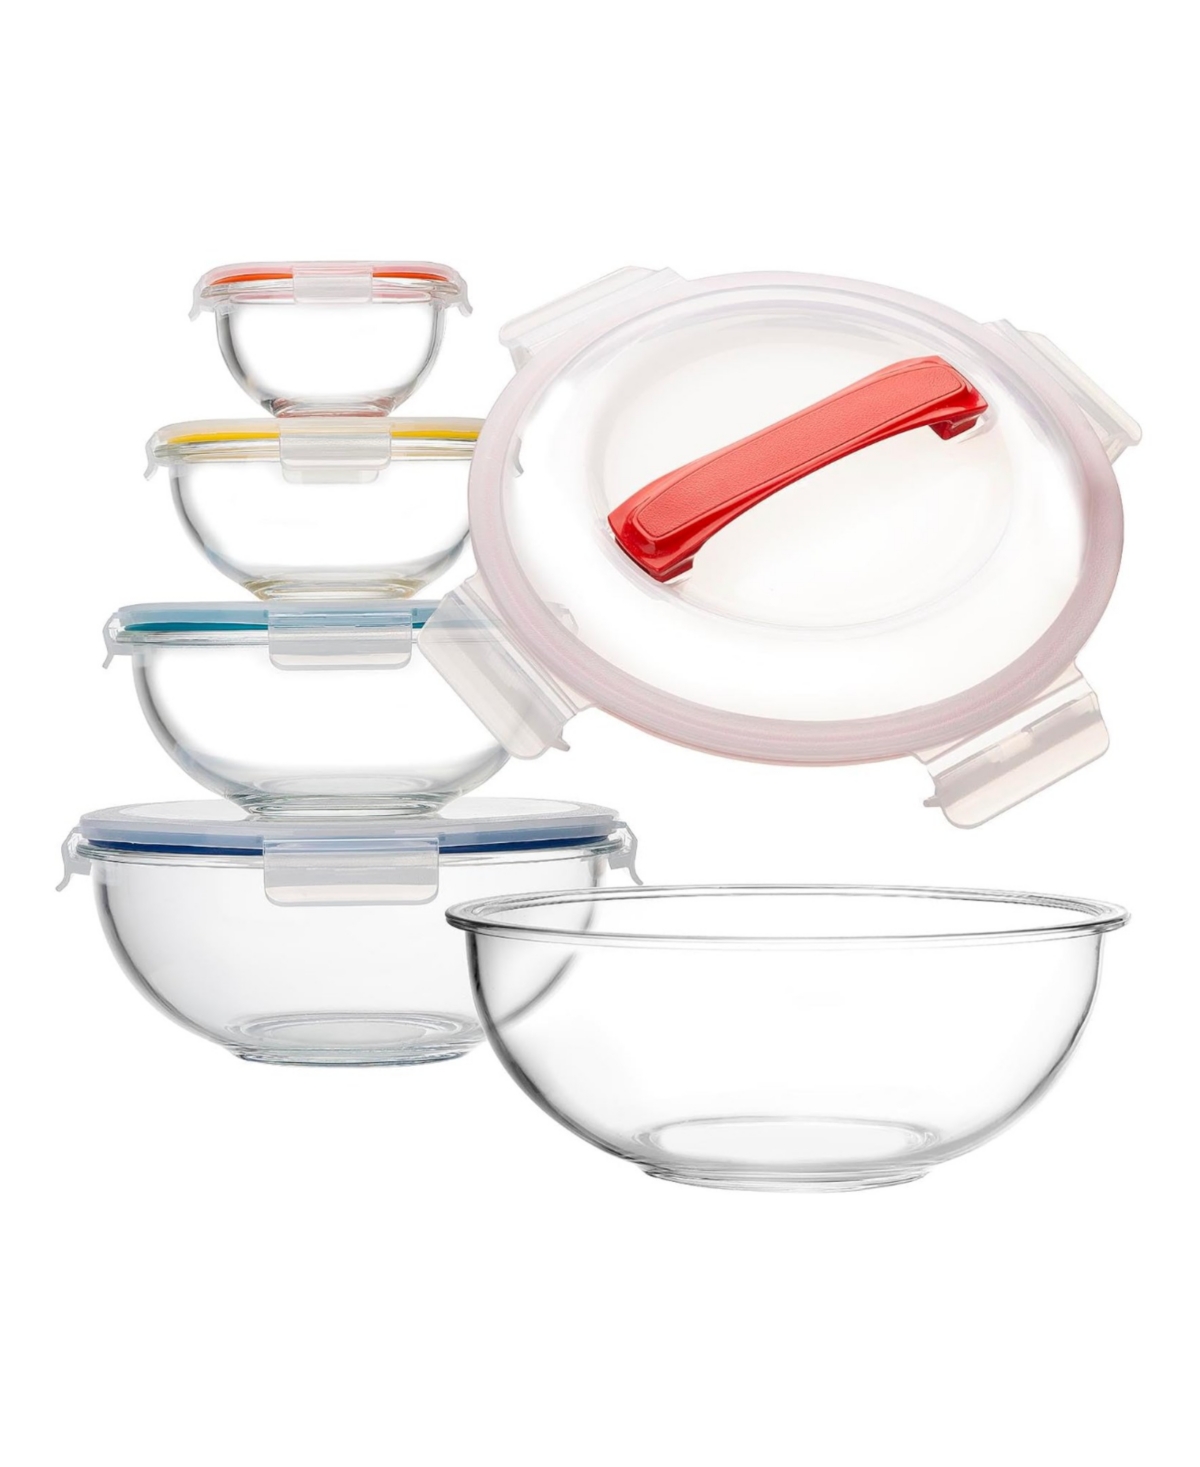 Genicook 5 Pc Container Nesting Borosilicate Glass Mixing Bowl Set With Locking Lids And Carry Handle In Multicolor